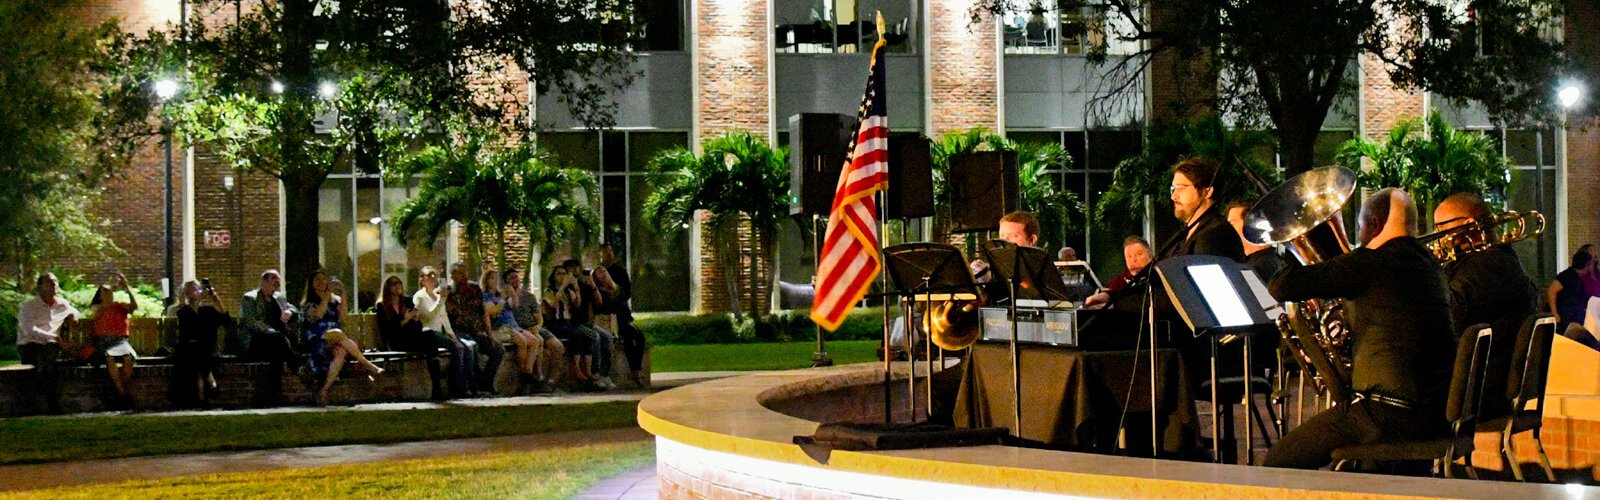  An instrumental orchestra accompanies the bells played by pianist Josh Cessna for the grand finale of the dedication concert of the Ars Sonora carillon on October 8th at the University of Tampa.